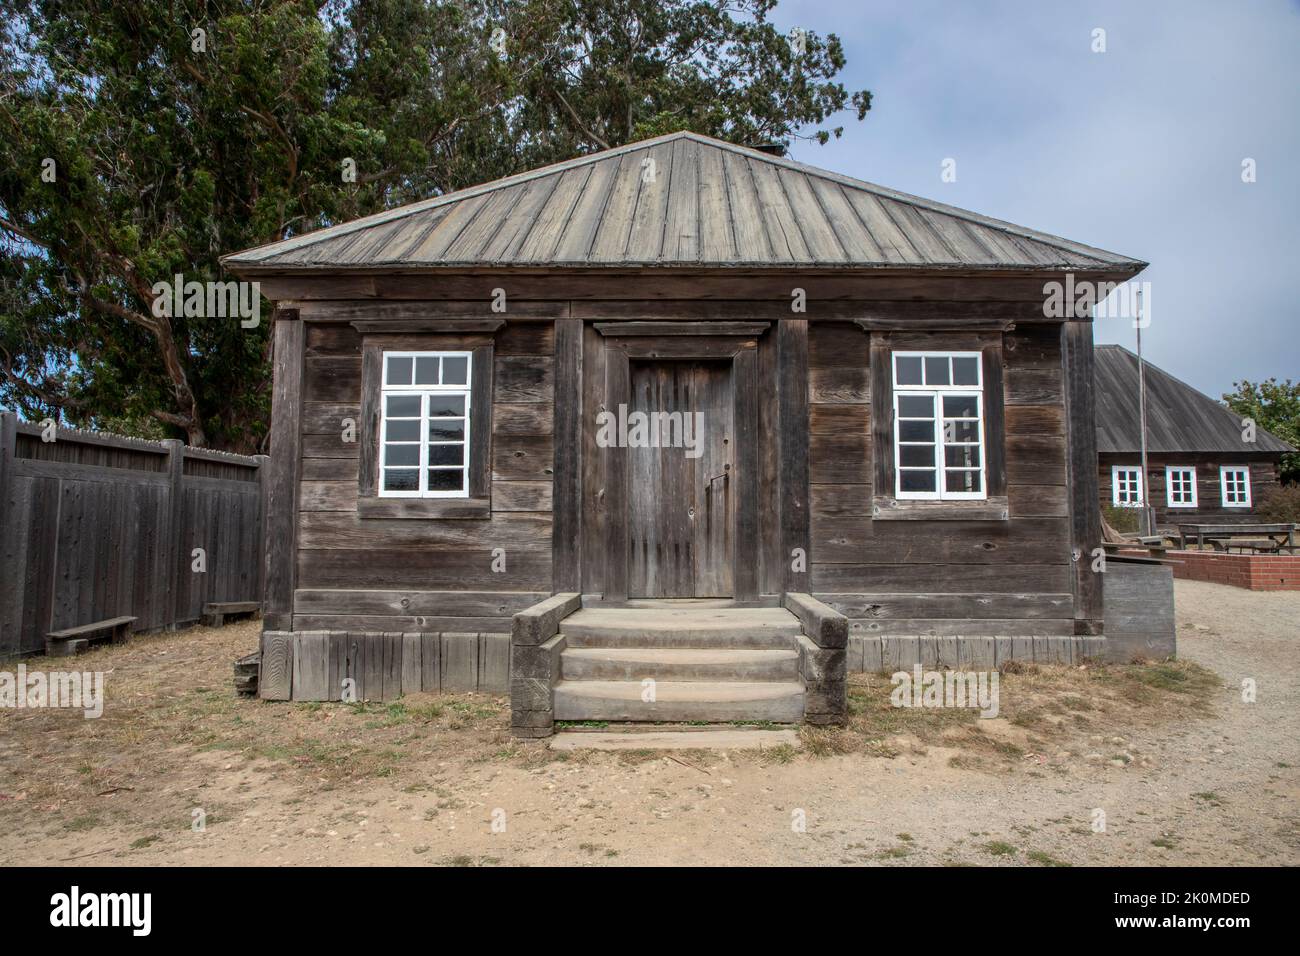 Fort Ross is an historic Russian fort on Highway 1 in Sonoma County. in Northern California. Stock Photo